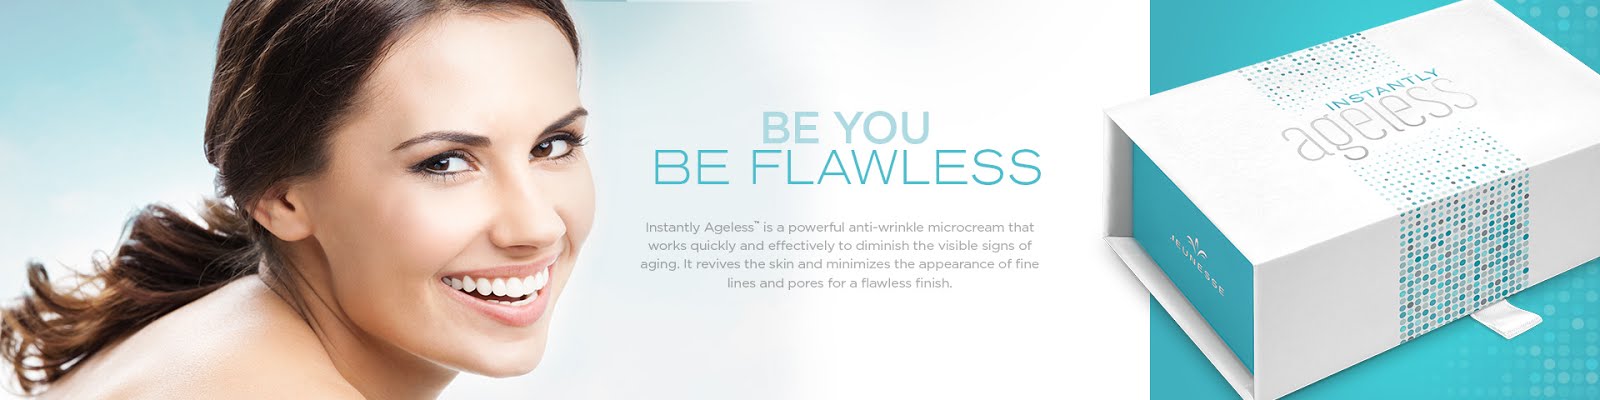 "INSTANTLY AGELESS"